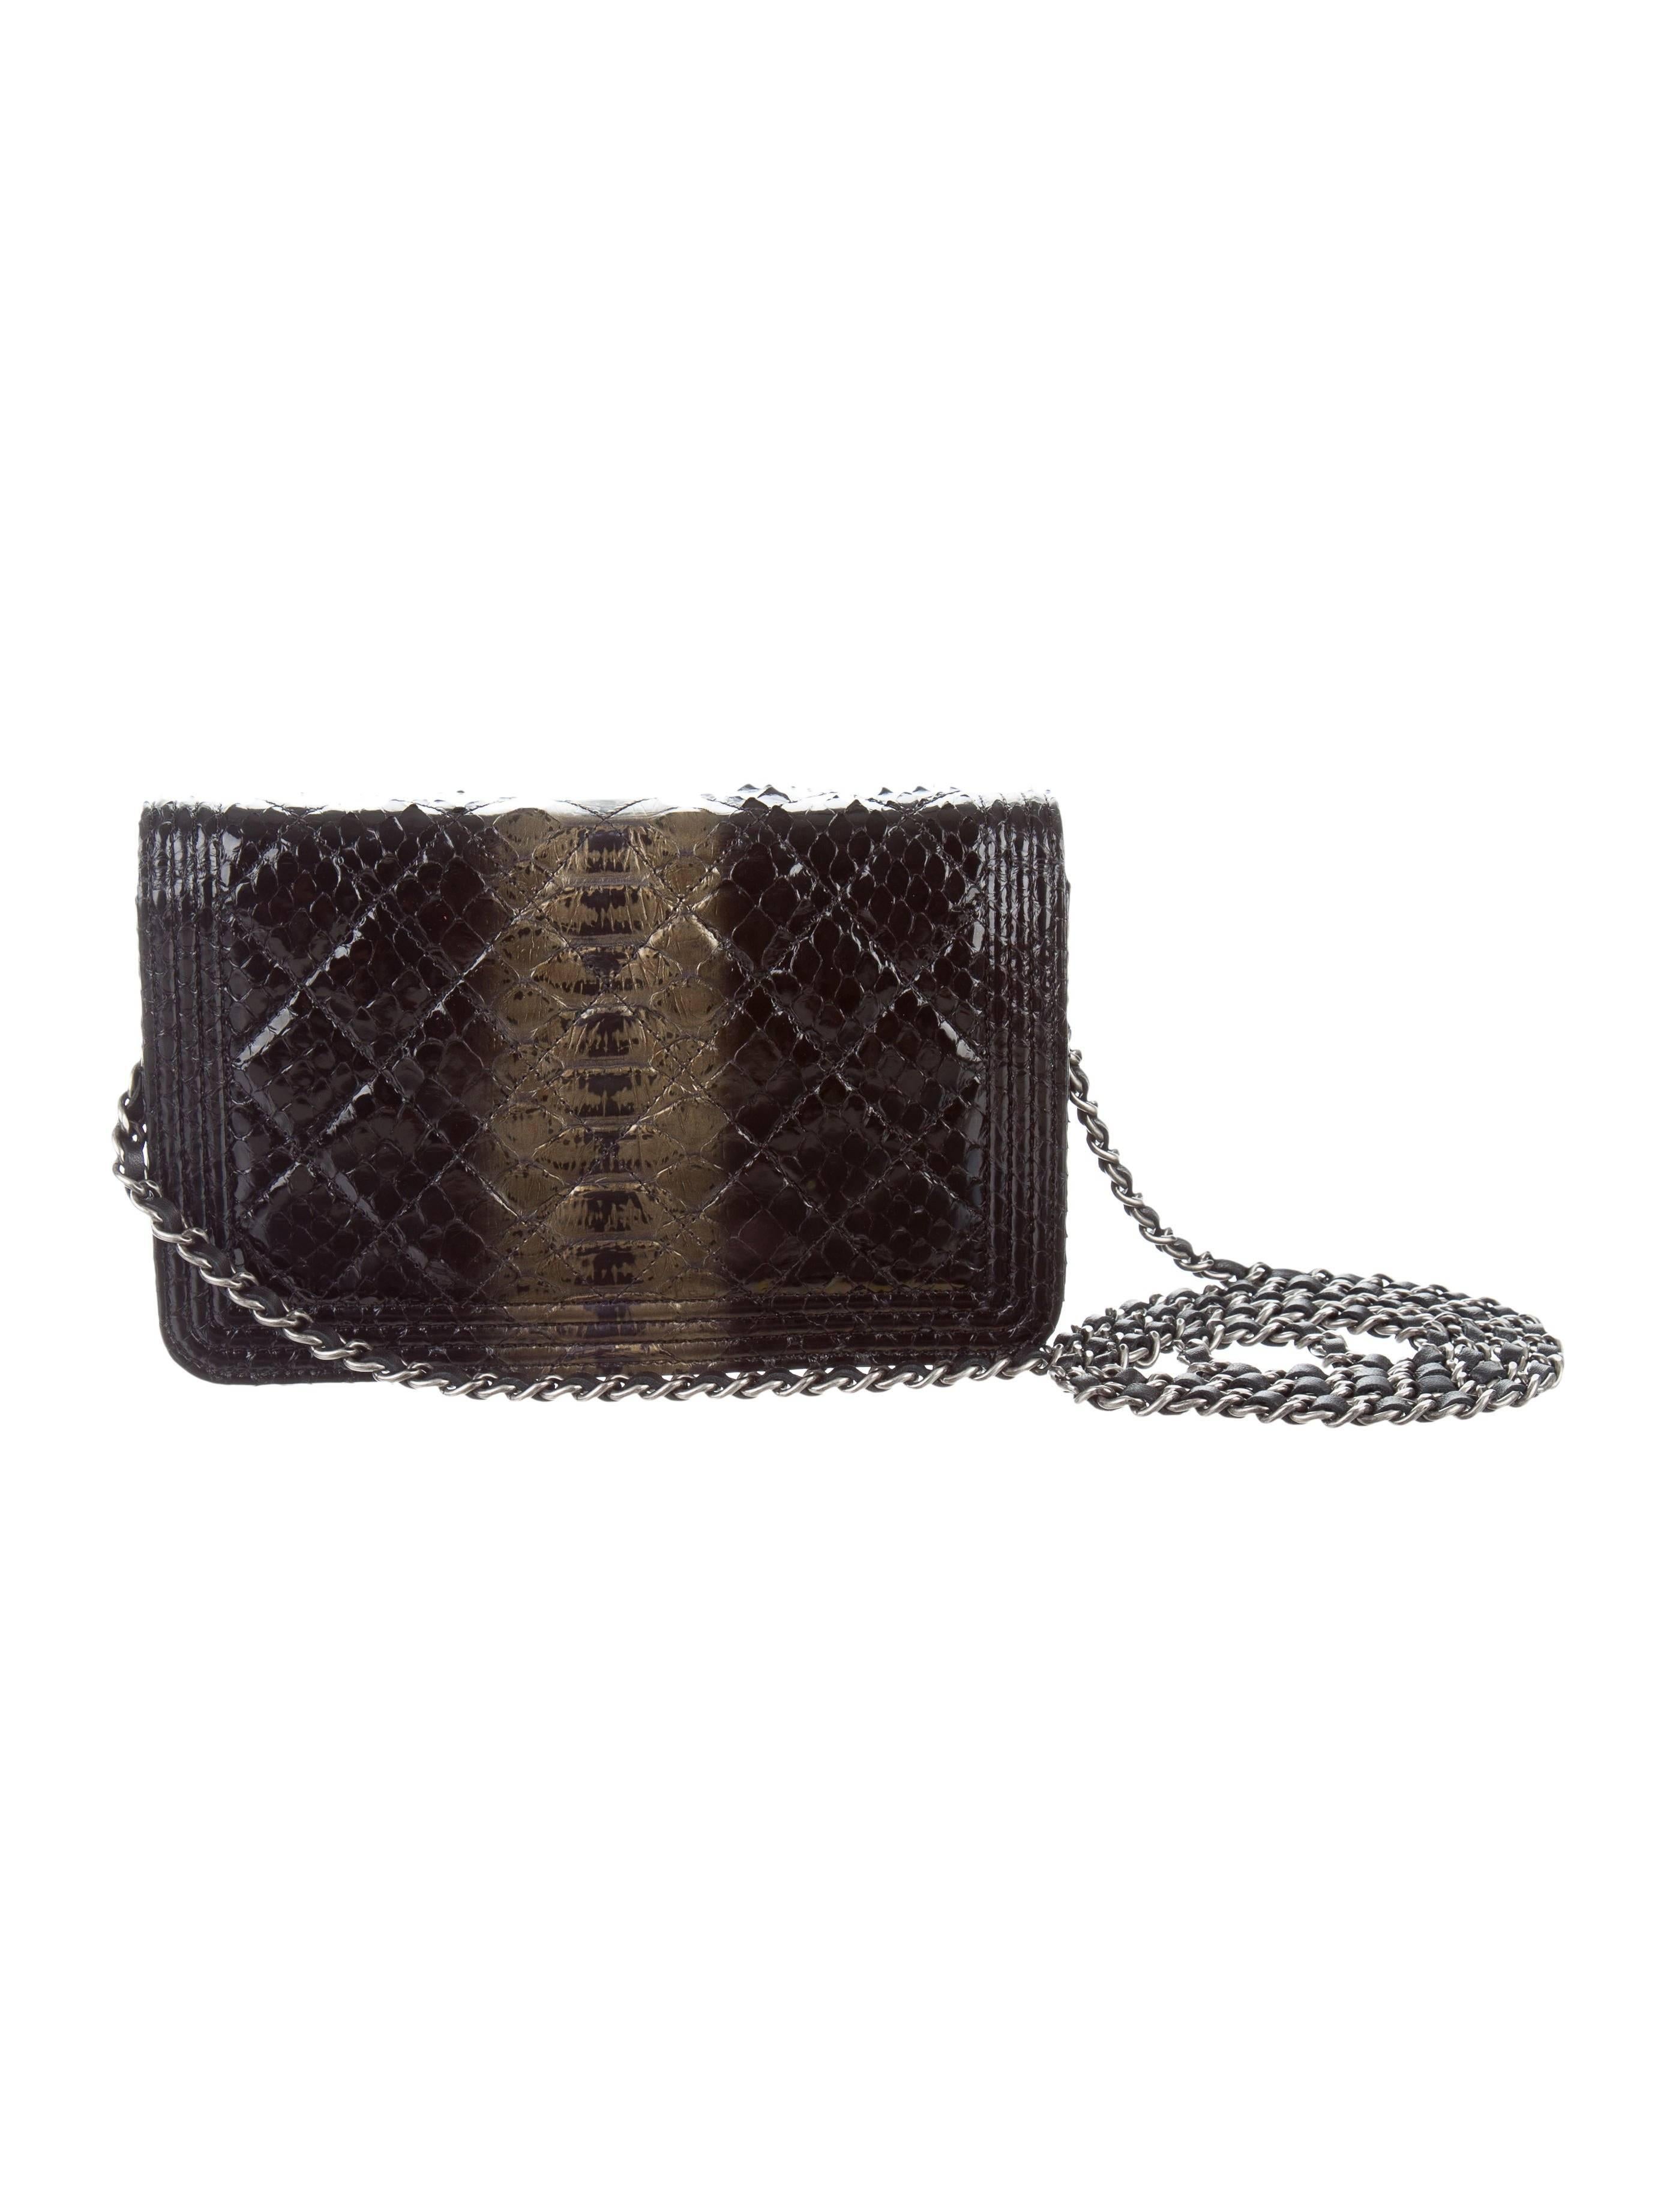 Chanel Like New Black Gold Python Exotic Leather WOC Shoulder Flap Bag in Box

Python
Leather
Silver tone hardware 
Woven lining 
Snap closure
Features six card slots
Date code present
Shoulder strap drop 25